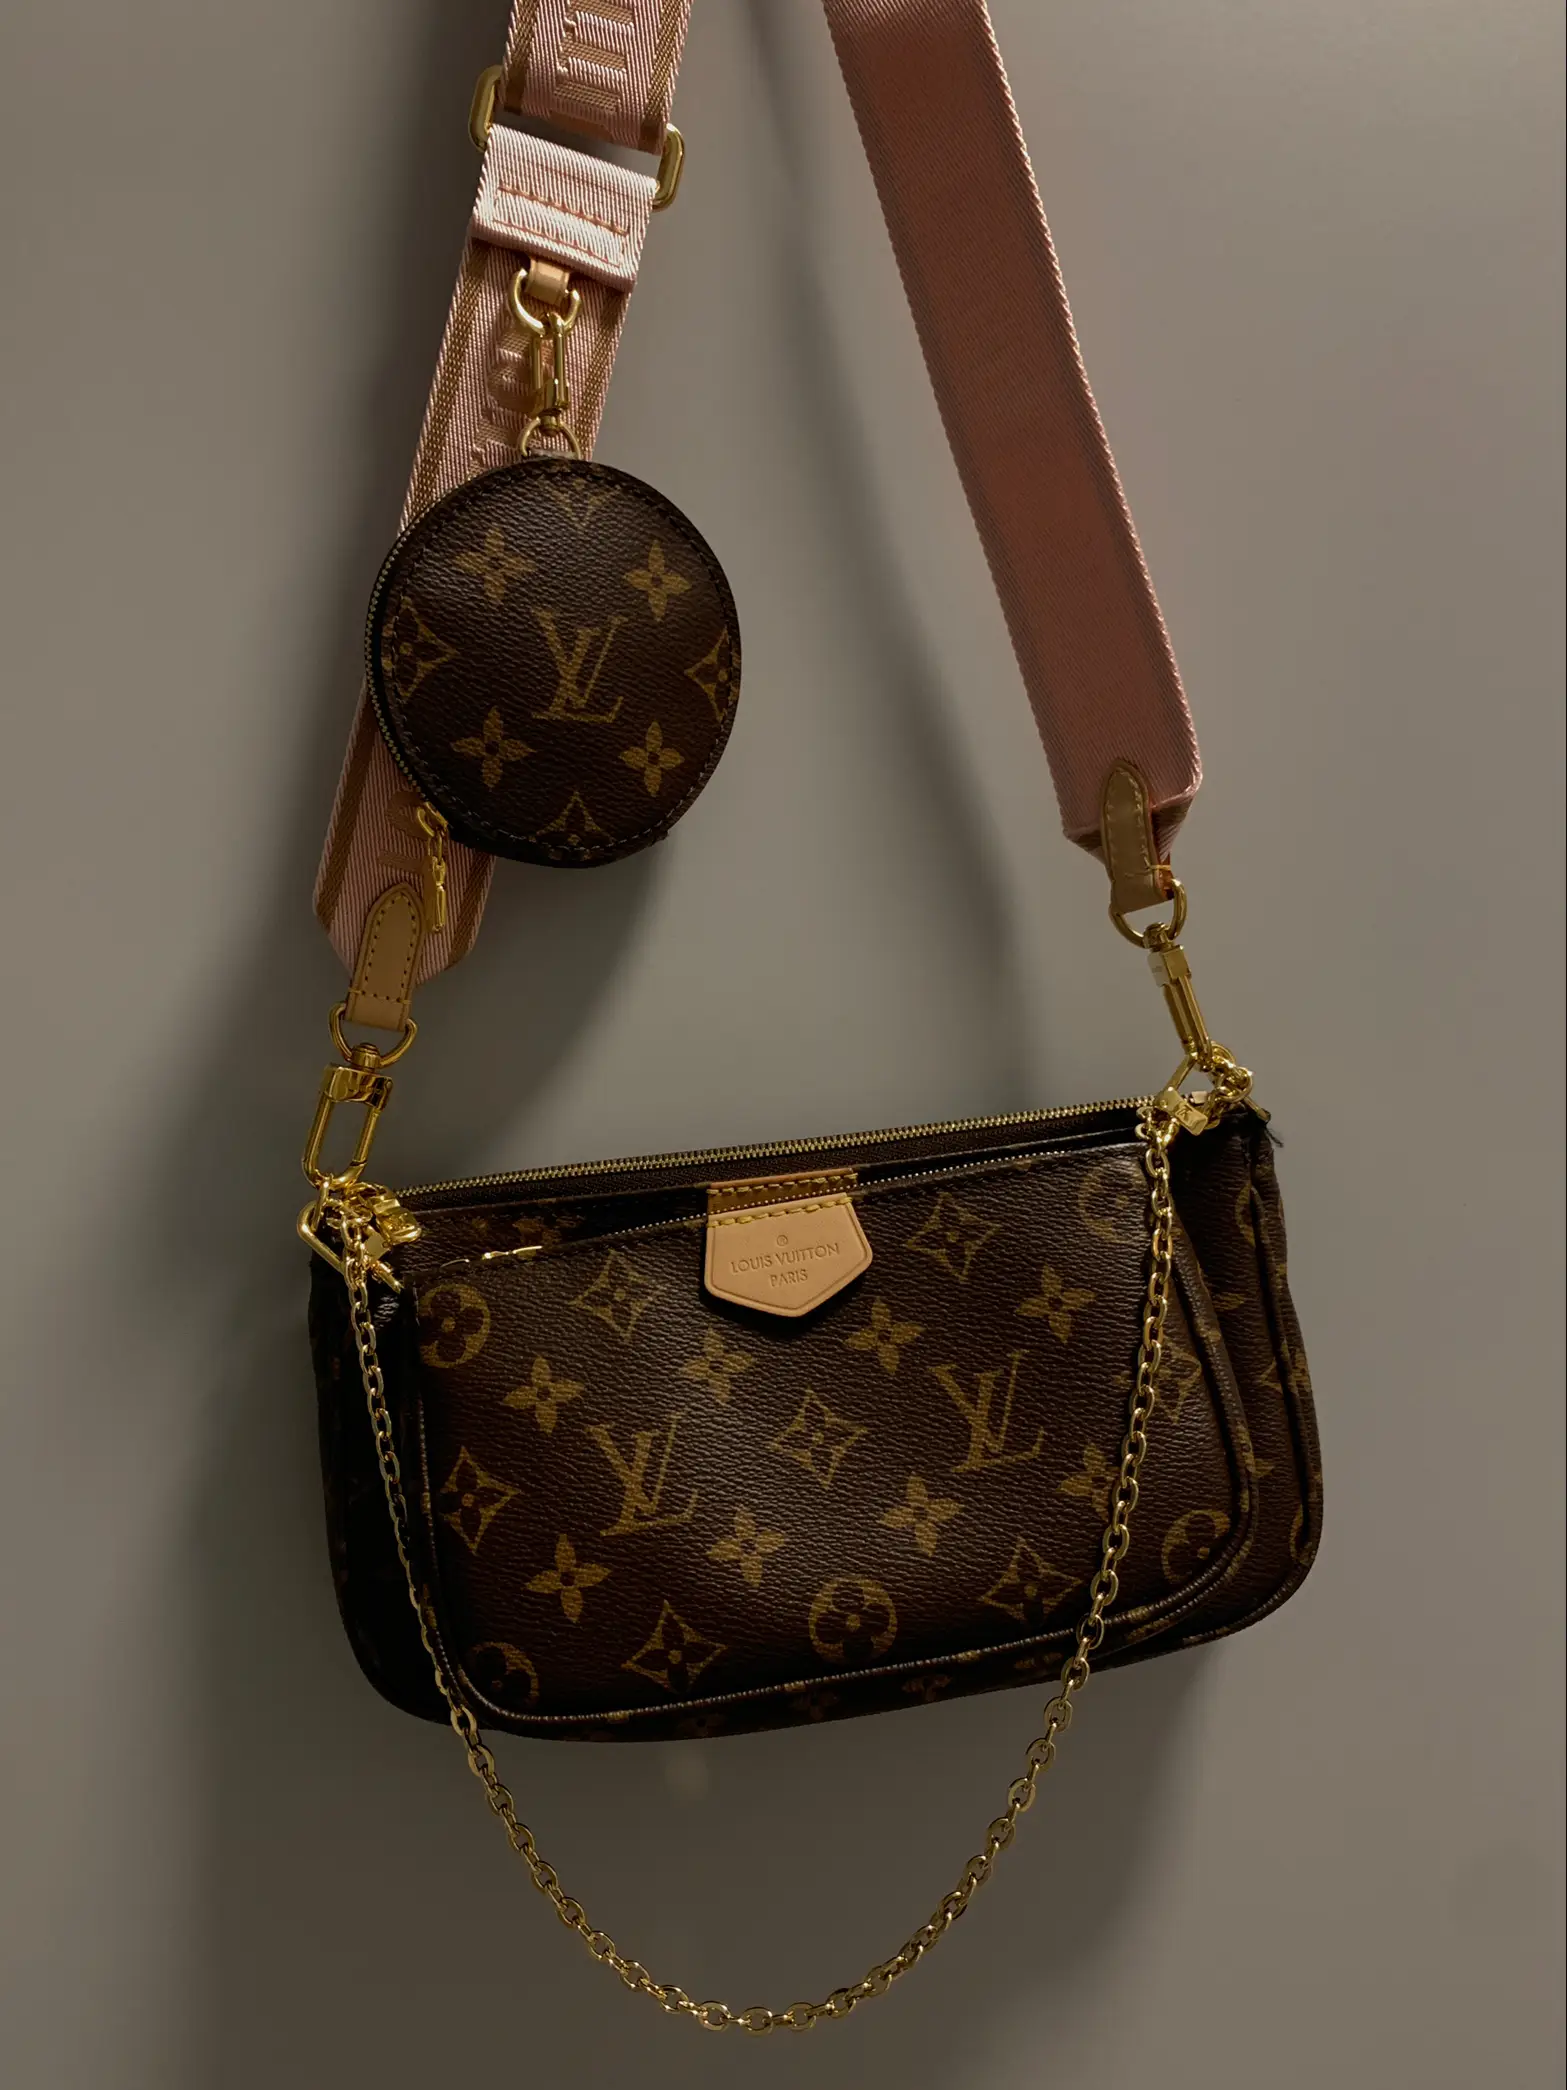 READ THIS BEFORE GETTING THIS LV BAG, Gallery posted by carmen 🤍